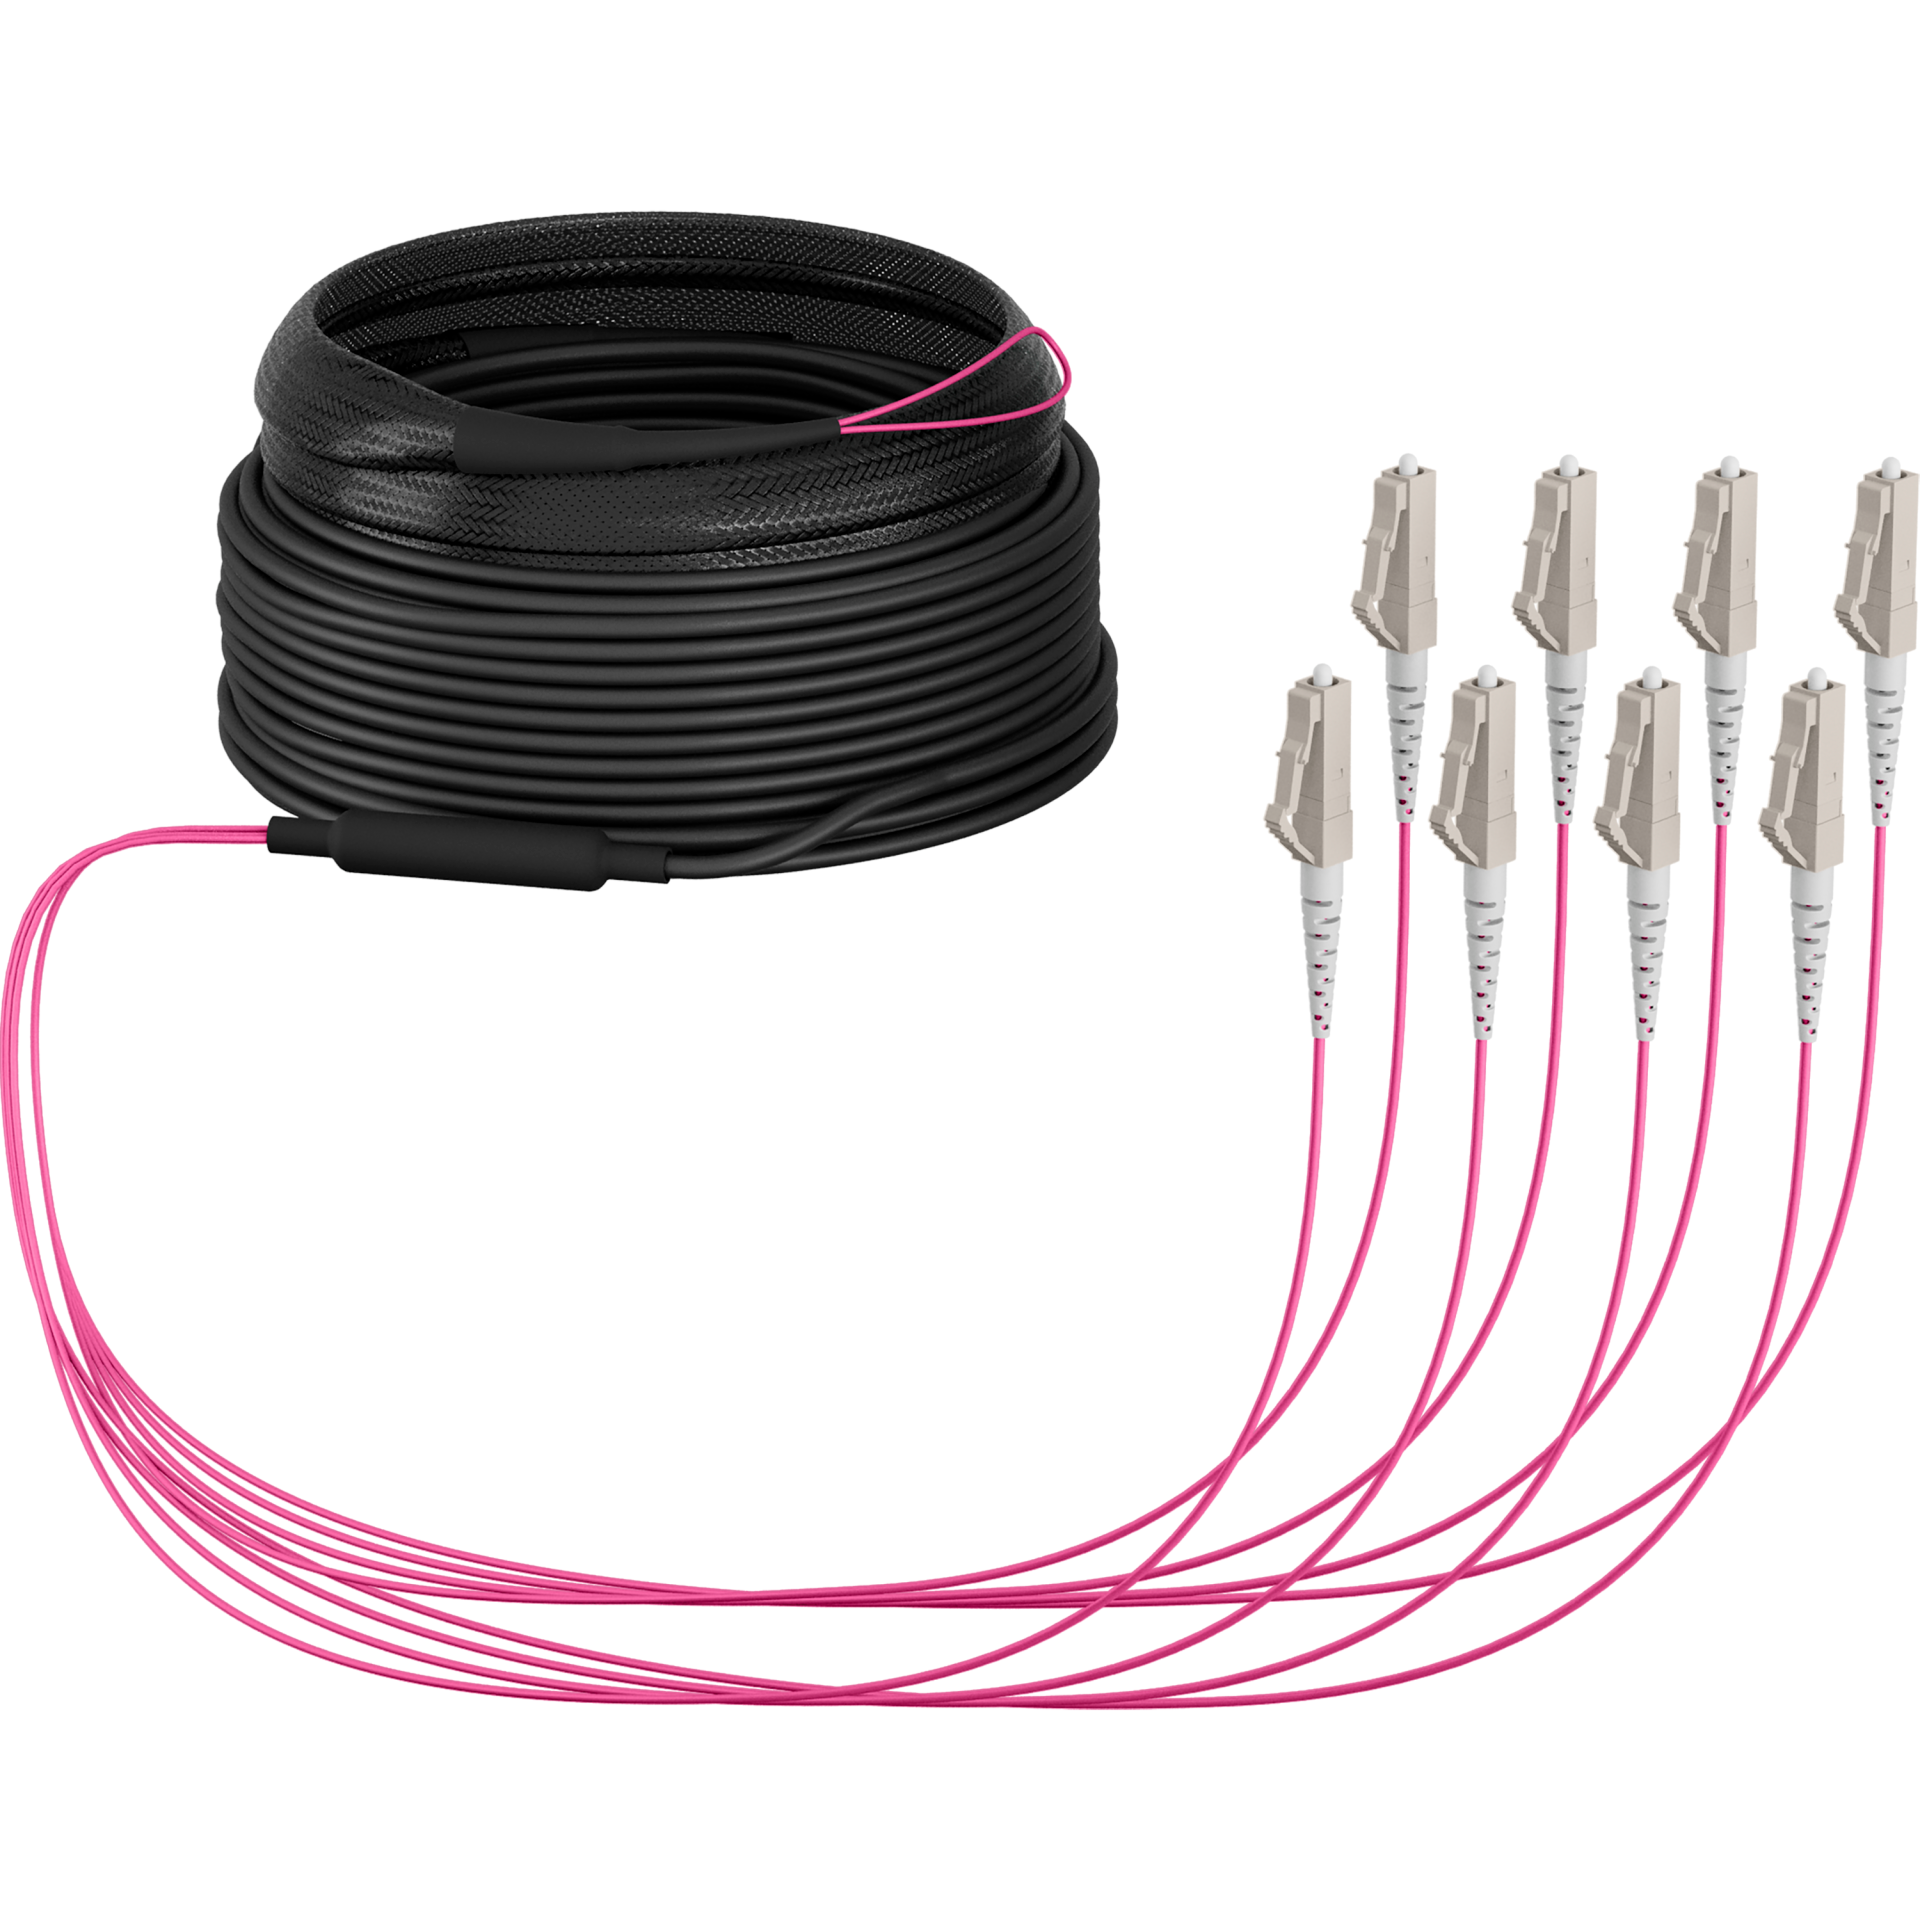 Trunkcable U-DQ(ZN)BH OM4 8G (1x8) LC-LC,20m Dca LSZH